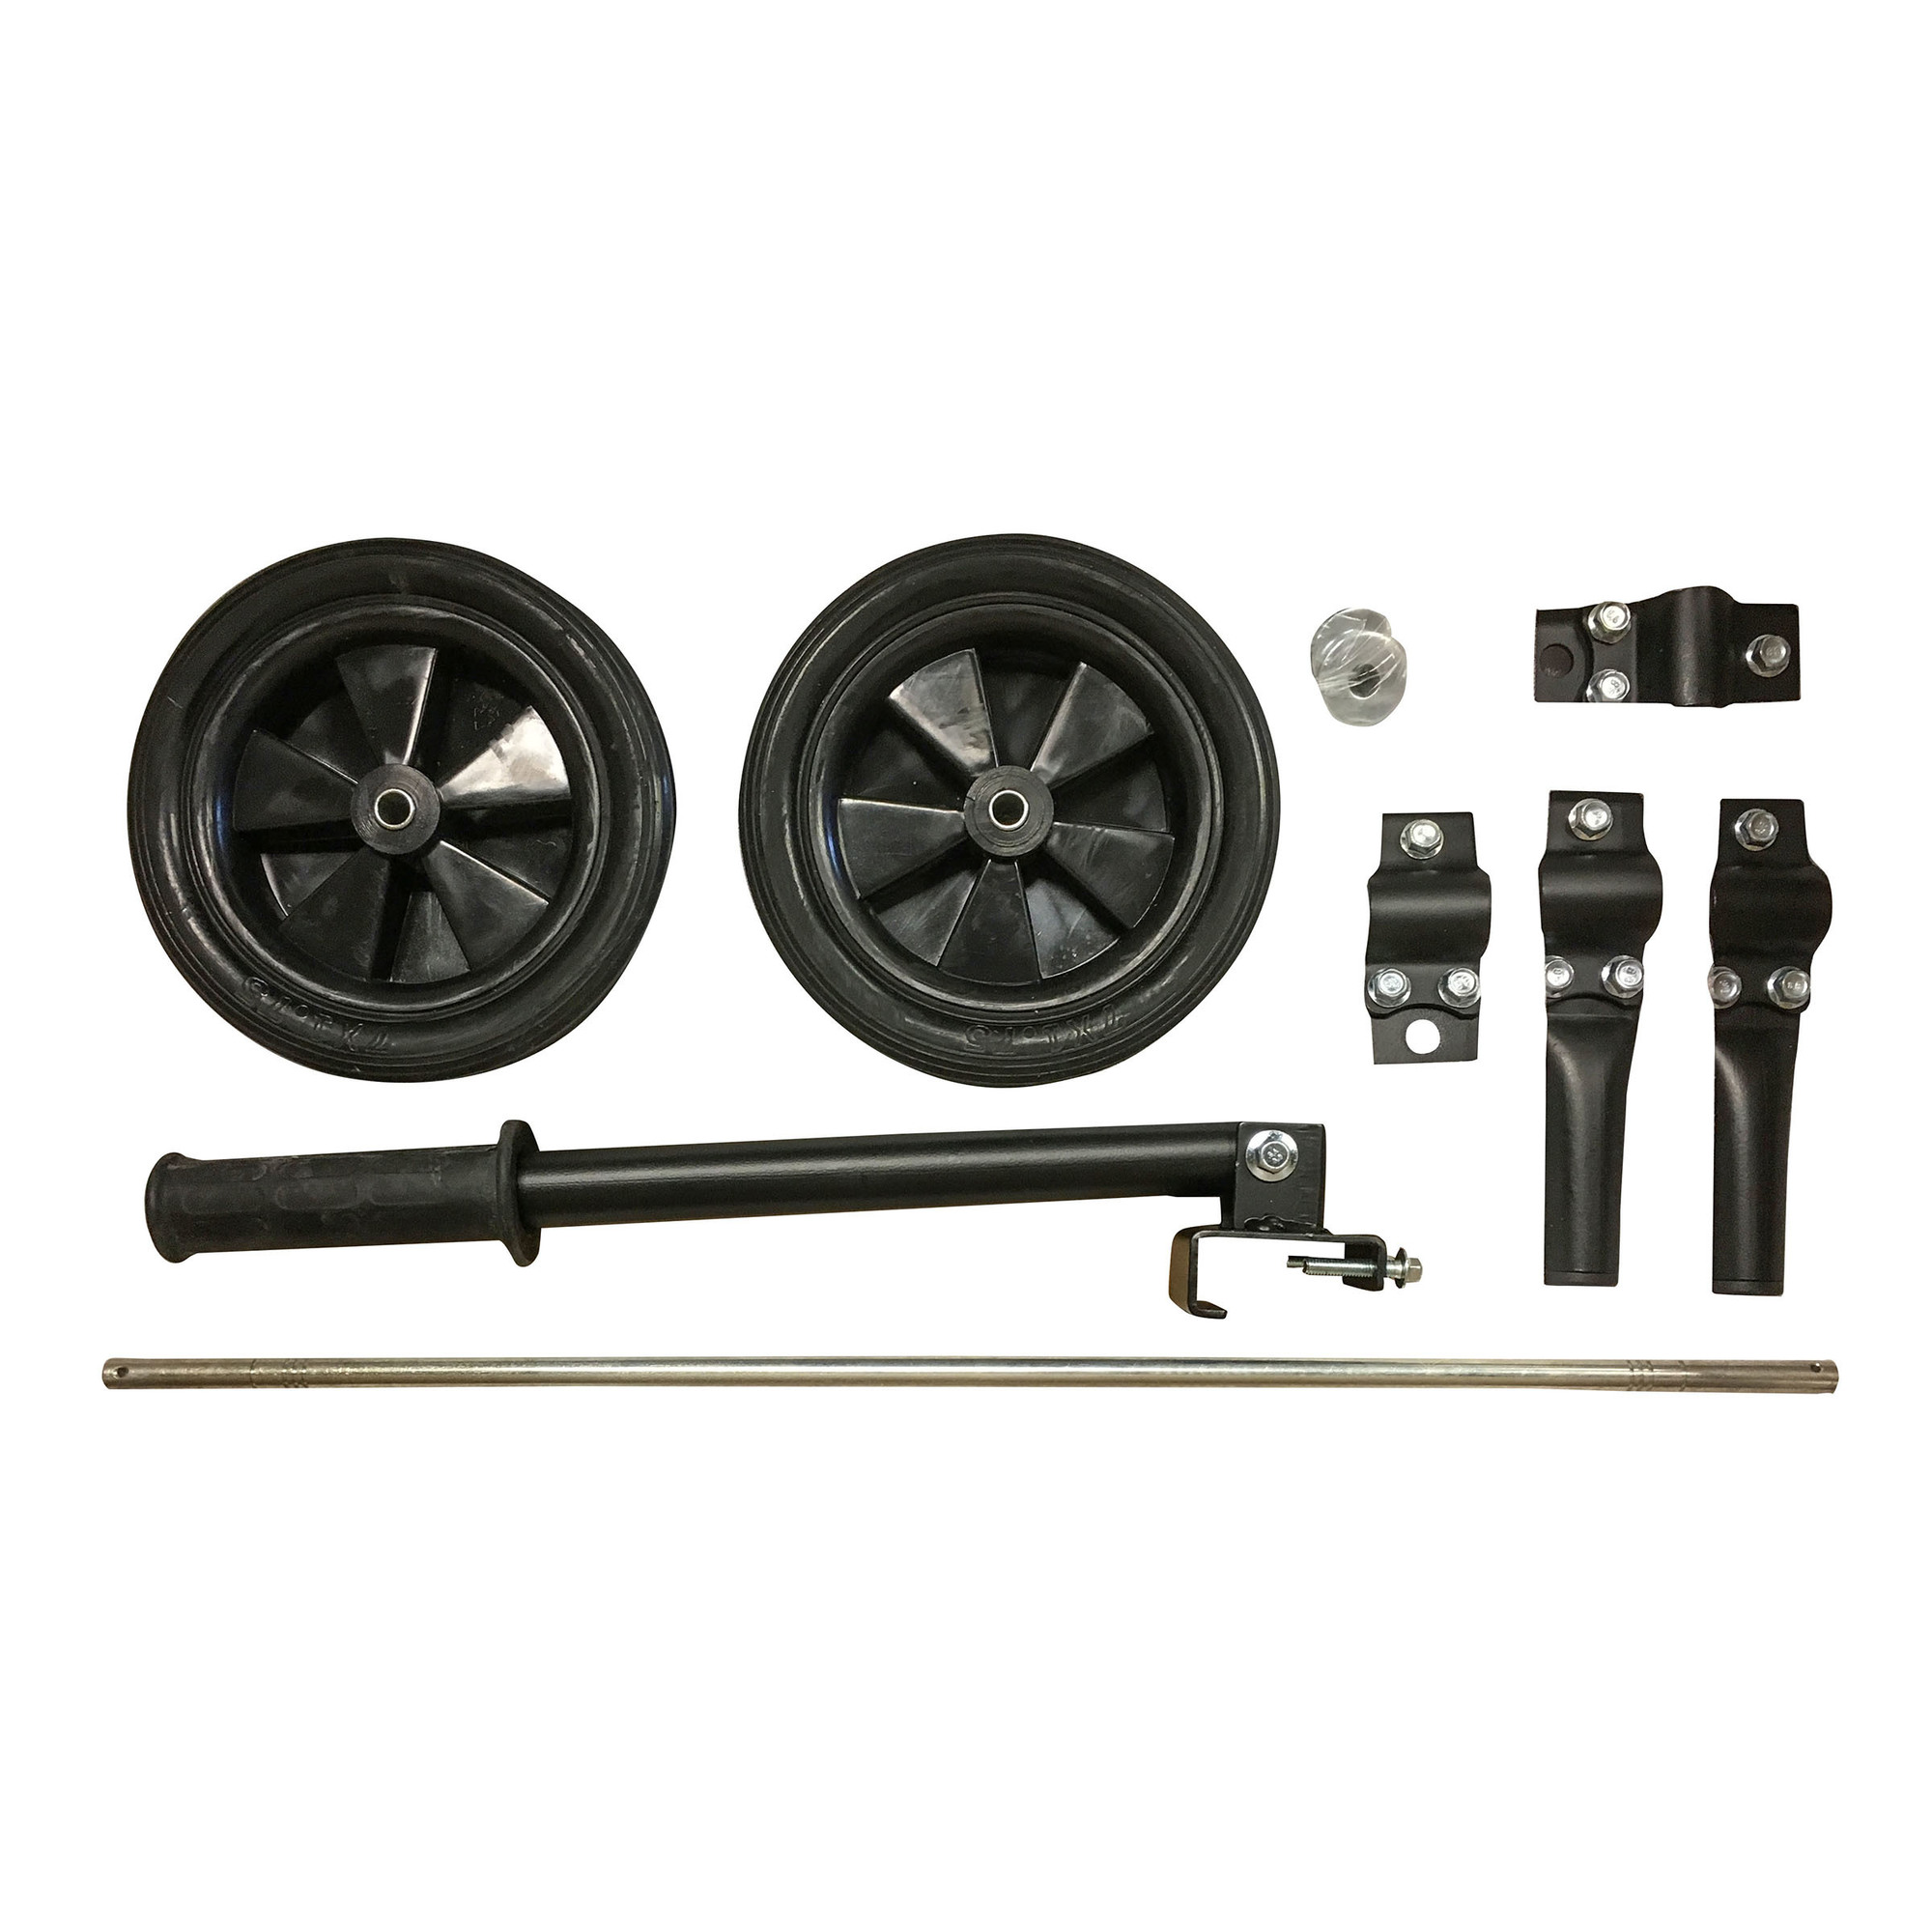 Sportsman, Generator Wheel Kit Assembly For 4000W Sportsman, Kit Includes two 7 inch wheels, center axle, center pull handl, Compatible With Sportsman